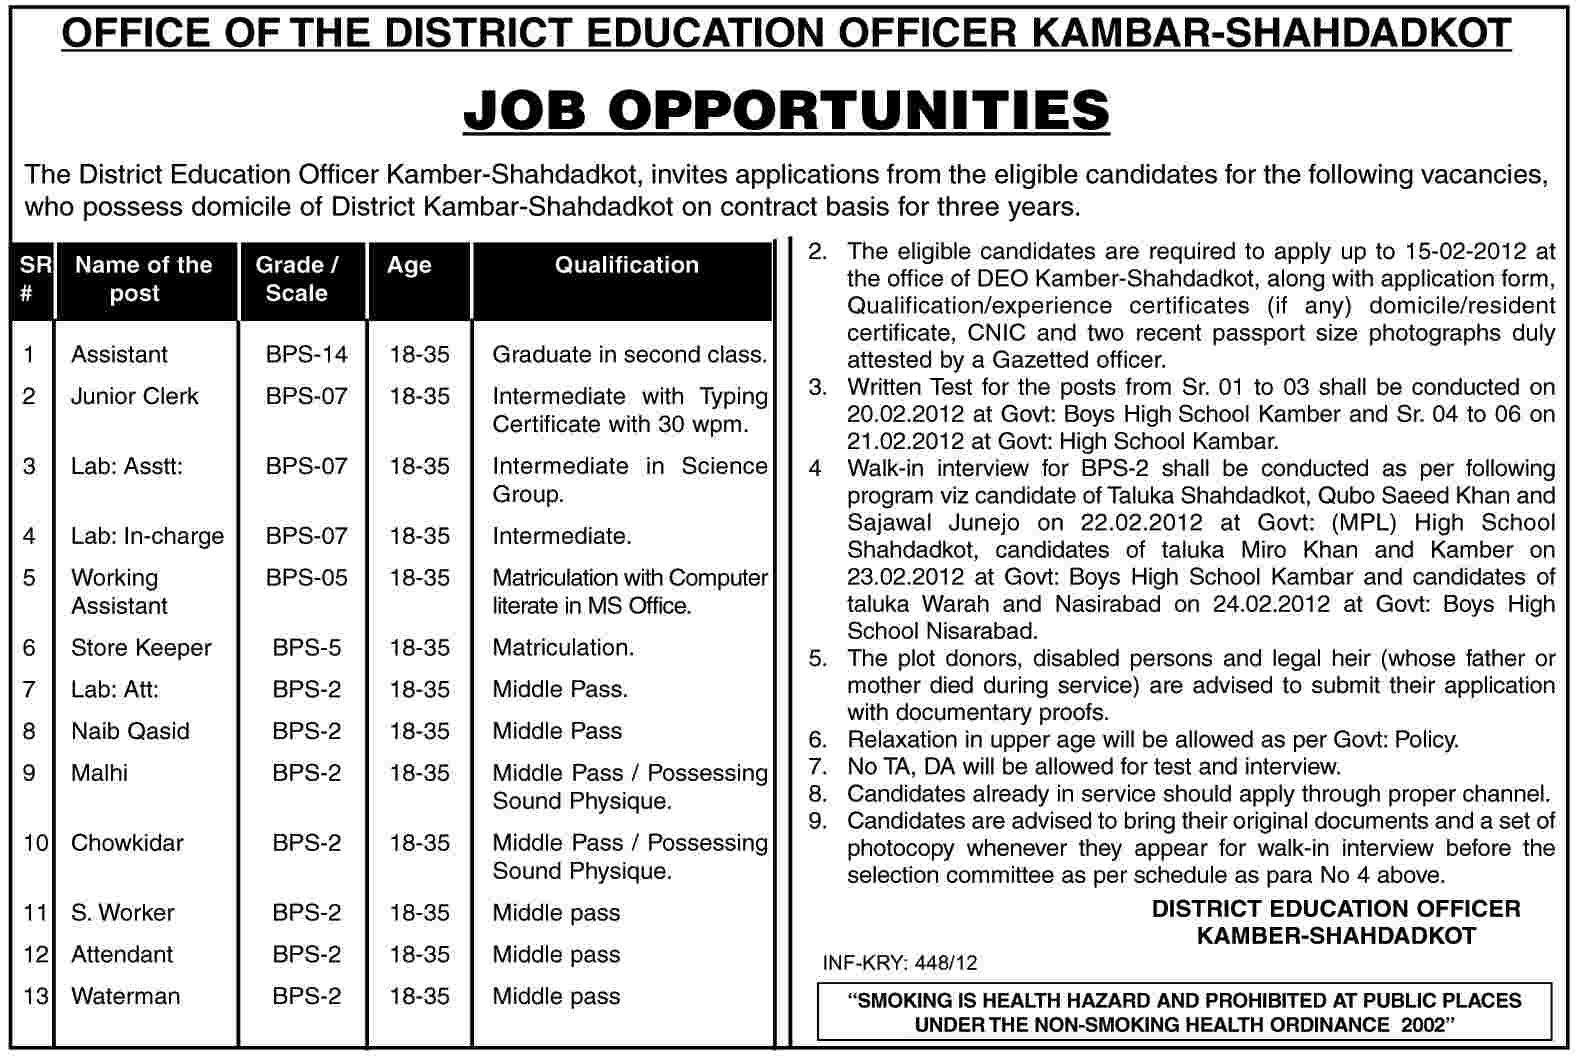 Office of the District Education Officer Kambar-Shahdadkot Jobs Opportunity